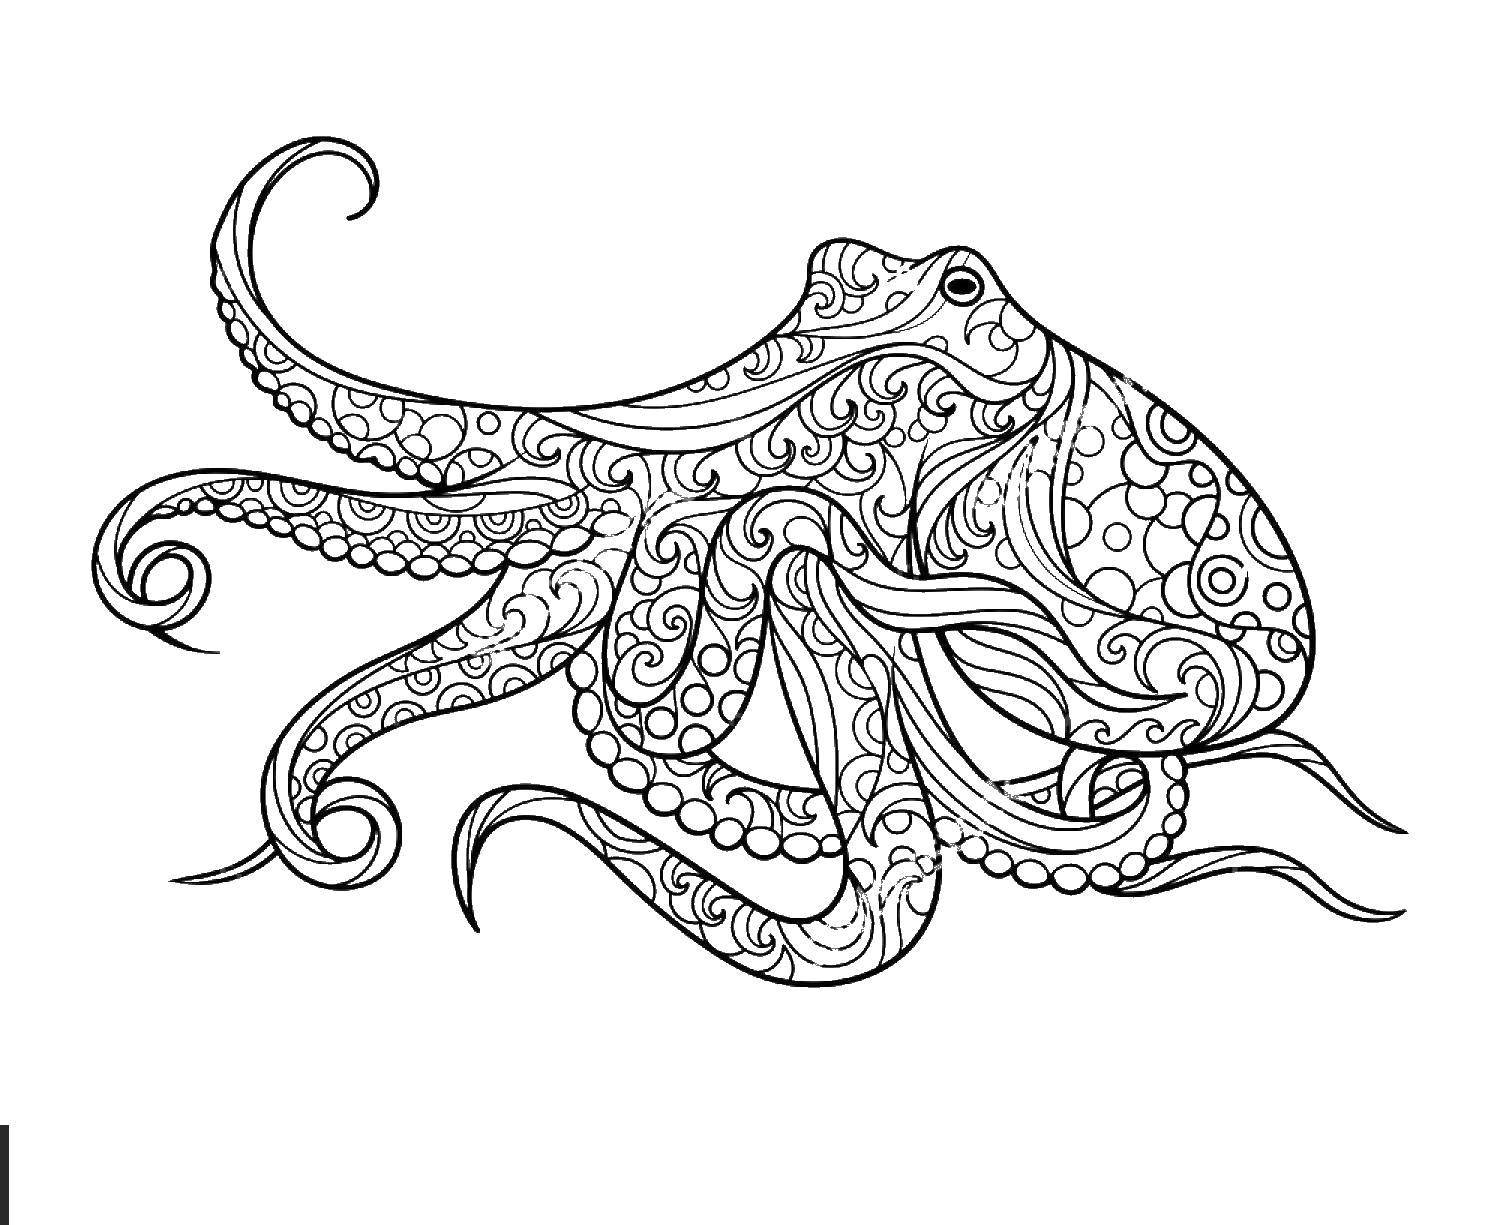 Coloring Patterned octopus. Category Marine animals. Tags:  Underwater world, octopus.